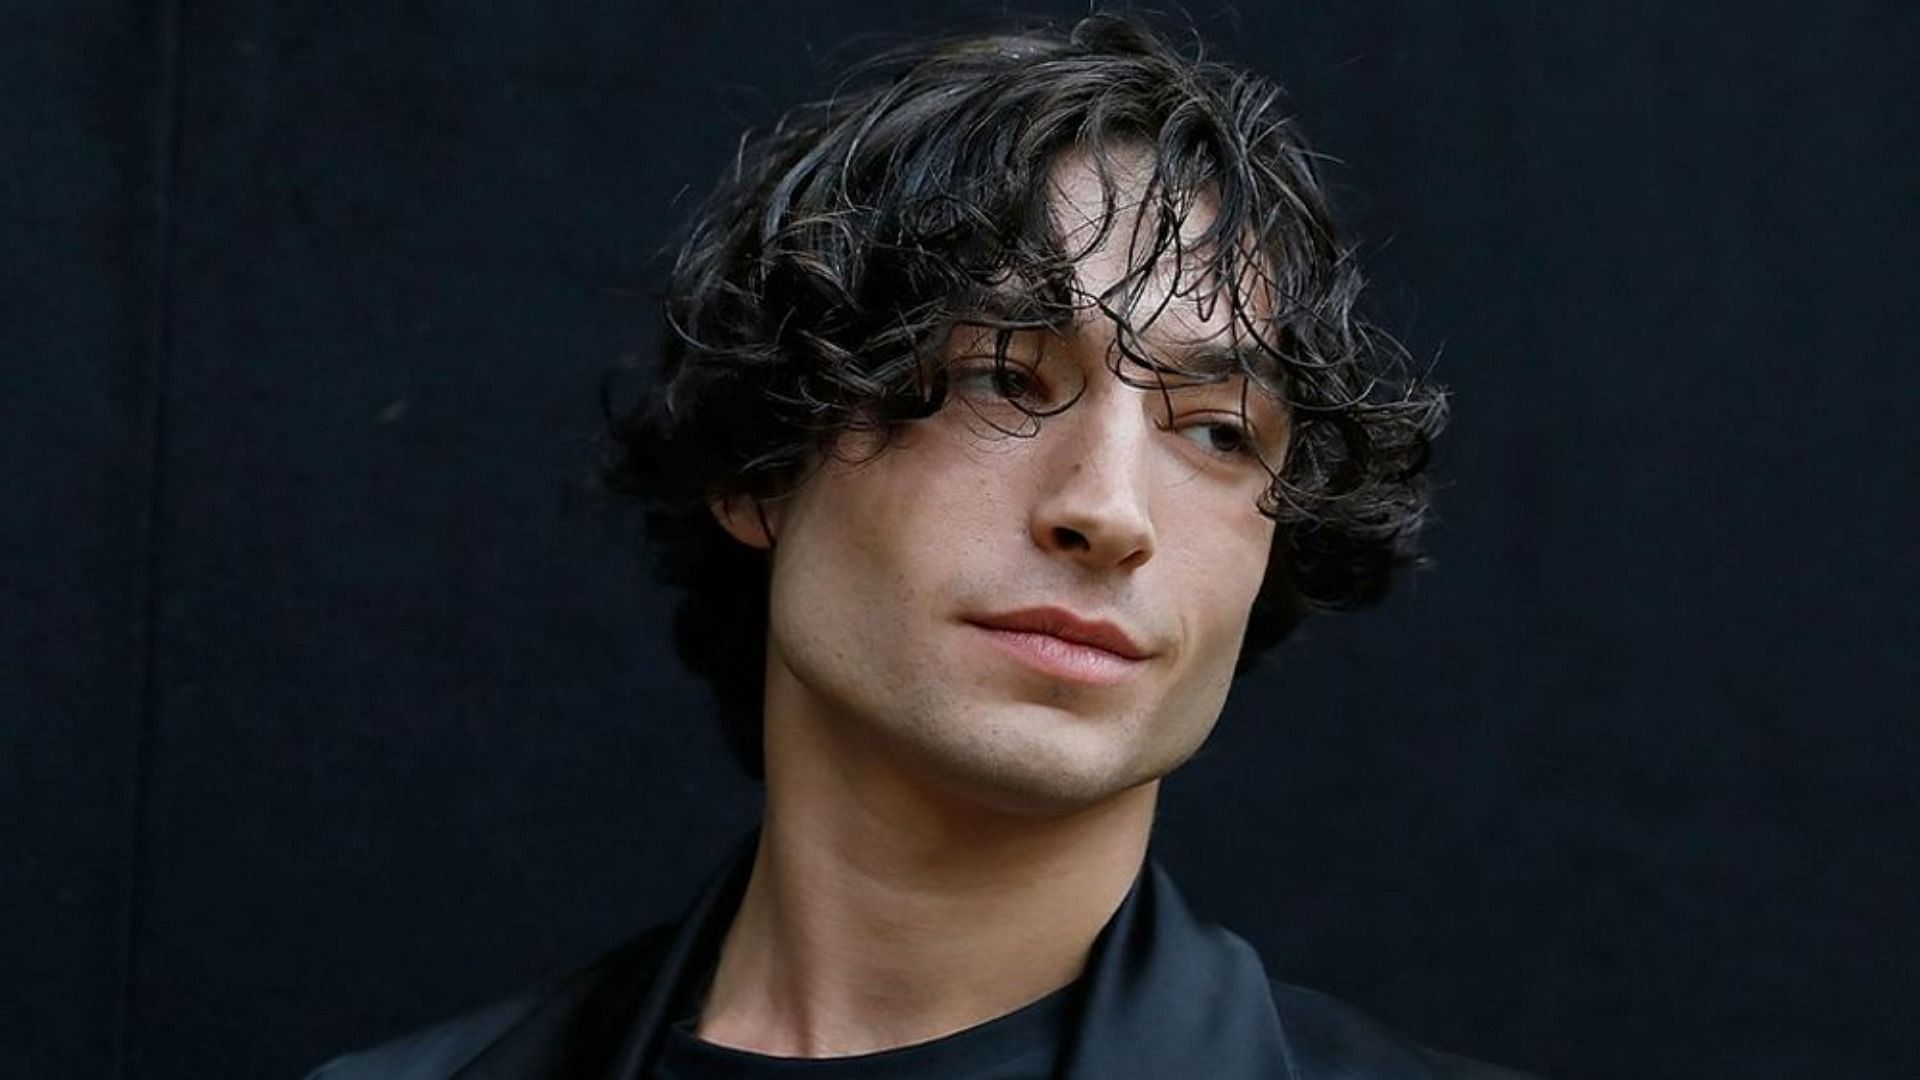 Ezra Miller was arrested charged with disorderly conduct and harassment (Image via Tristan Fewings/Getty Images)